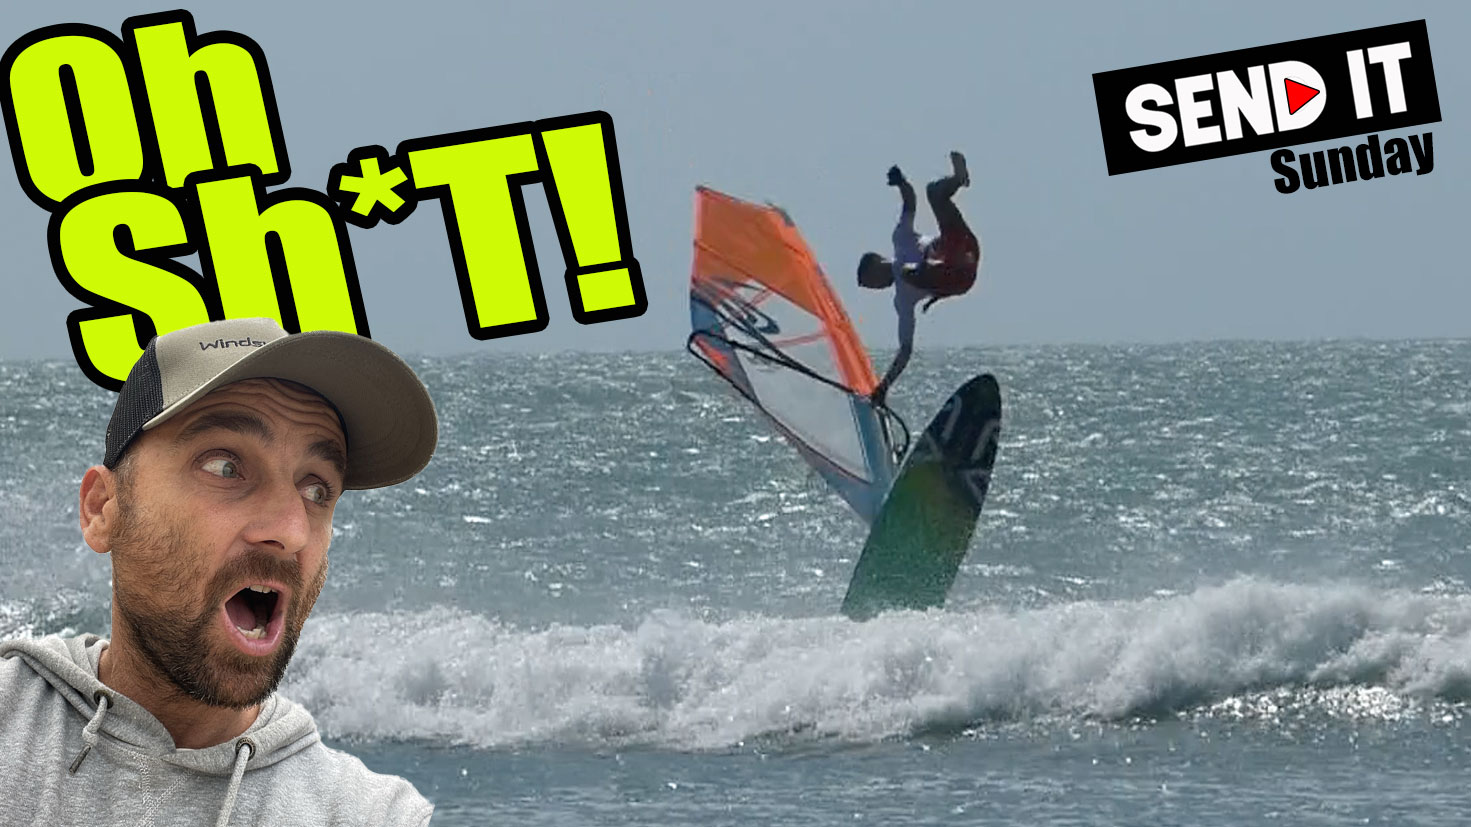 Weekly dose of Windsurfing Carnage! – Send it Sunday – Ep 161